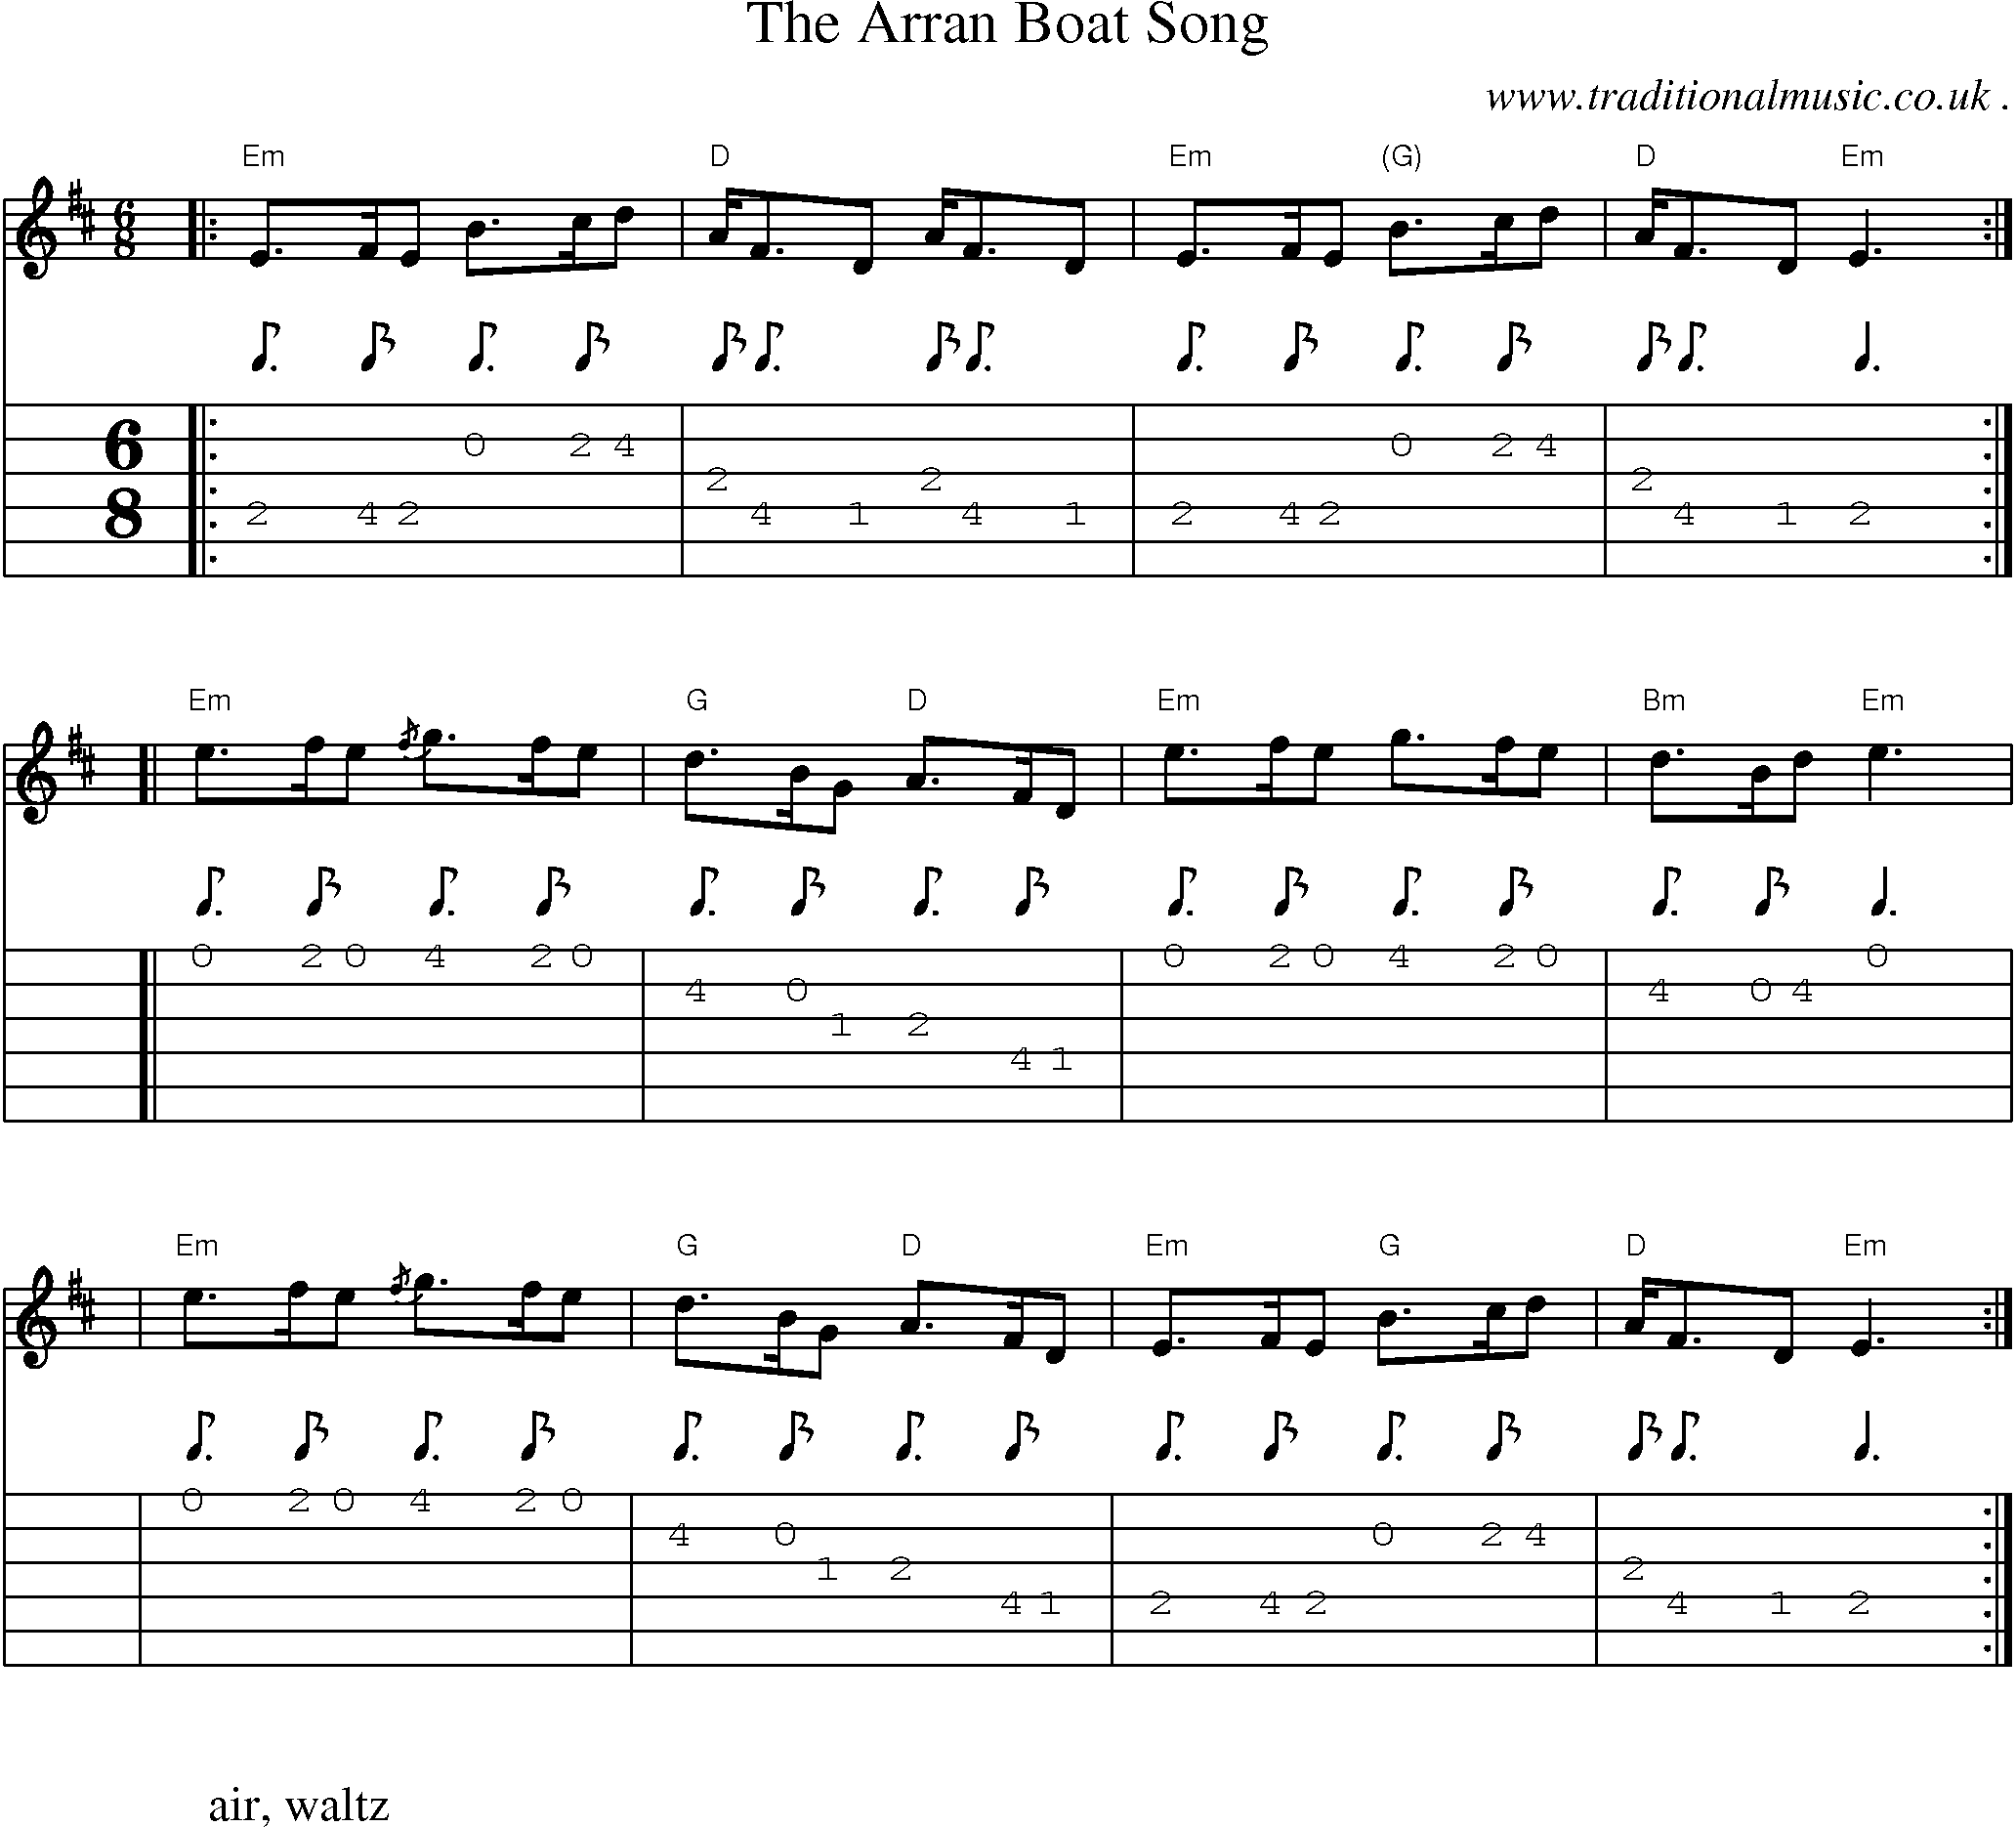 Sheet-music  score, Chords and Guitar Tabs for The Arran Boat Song